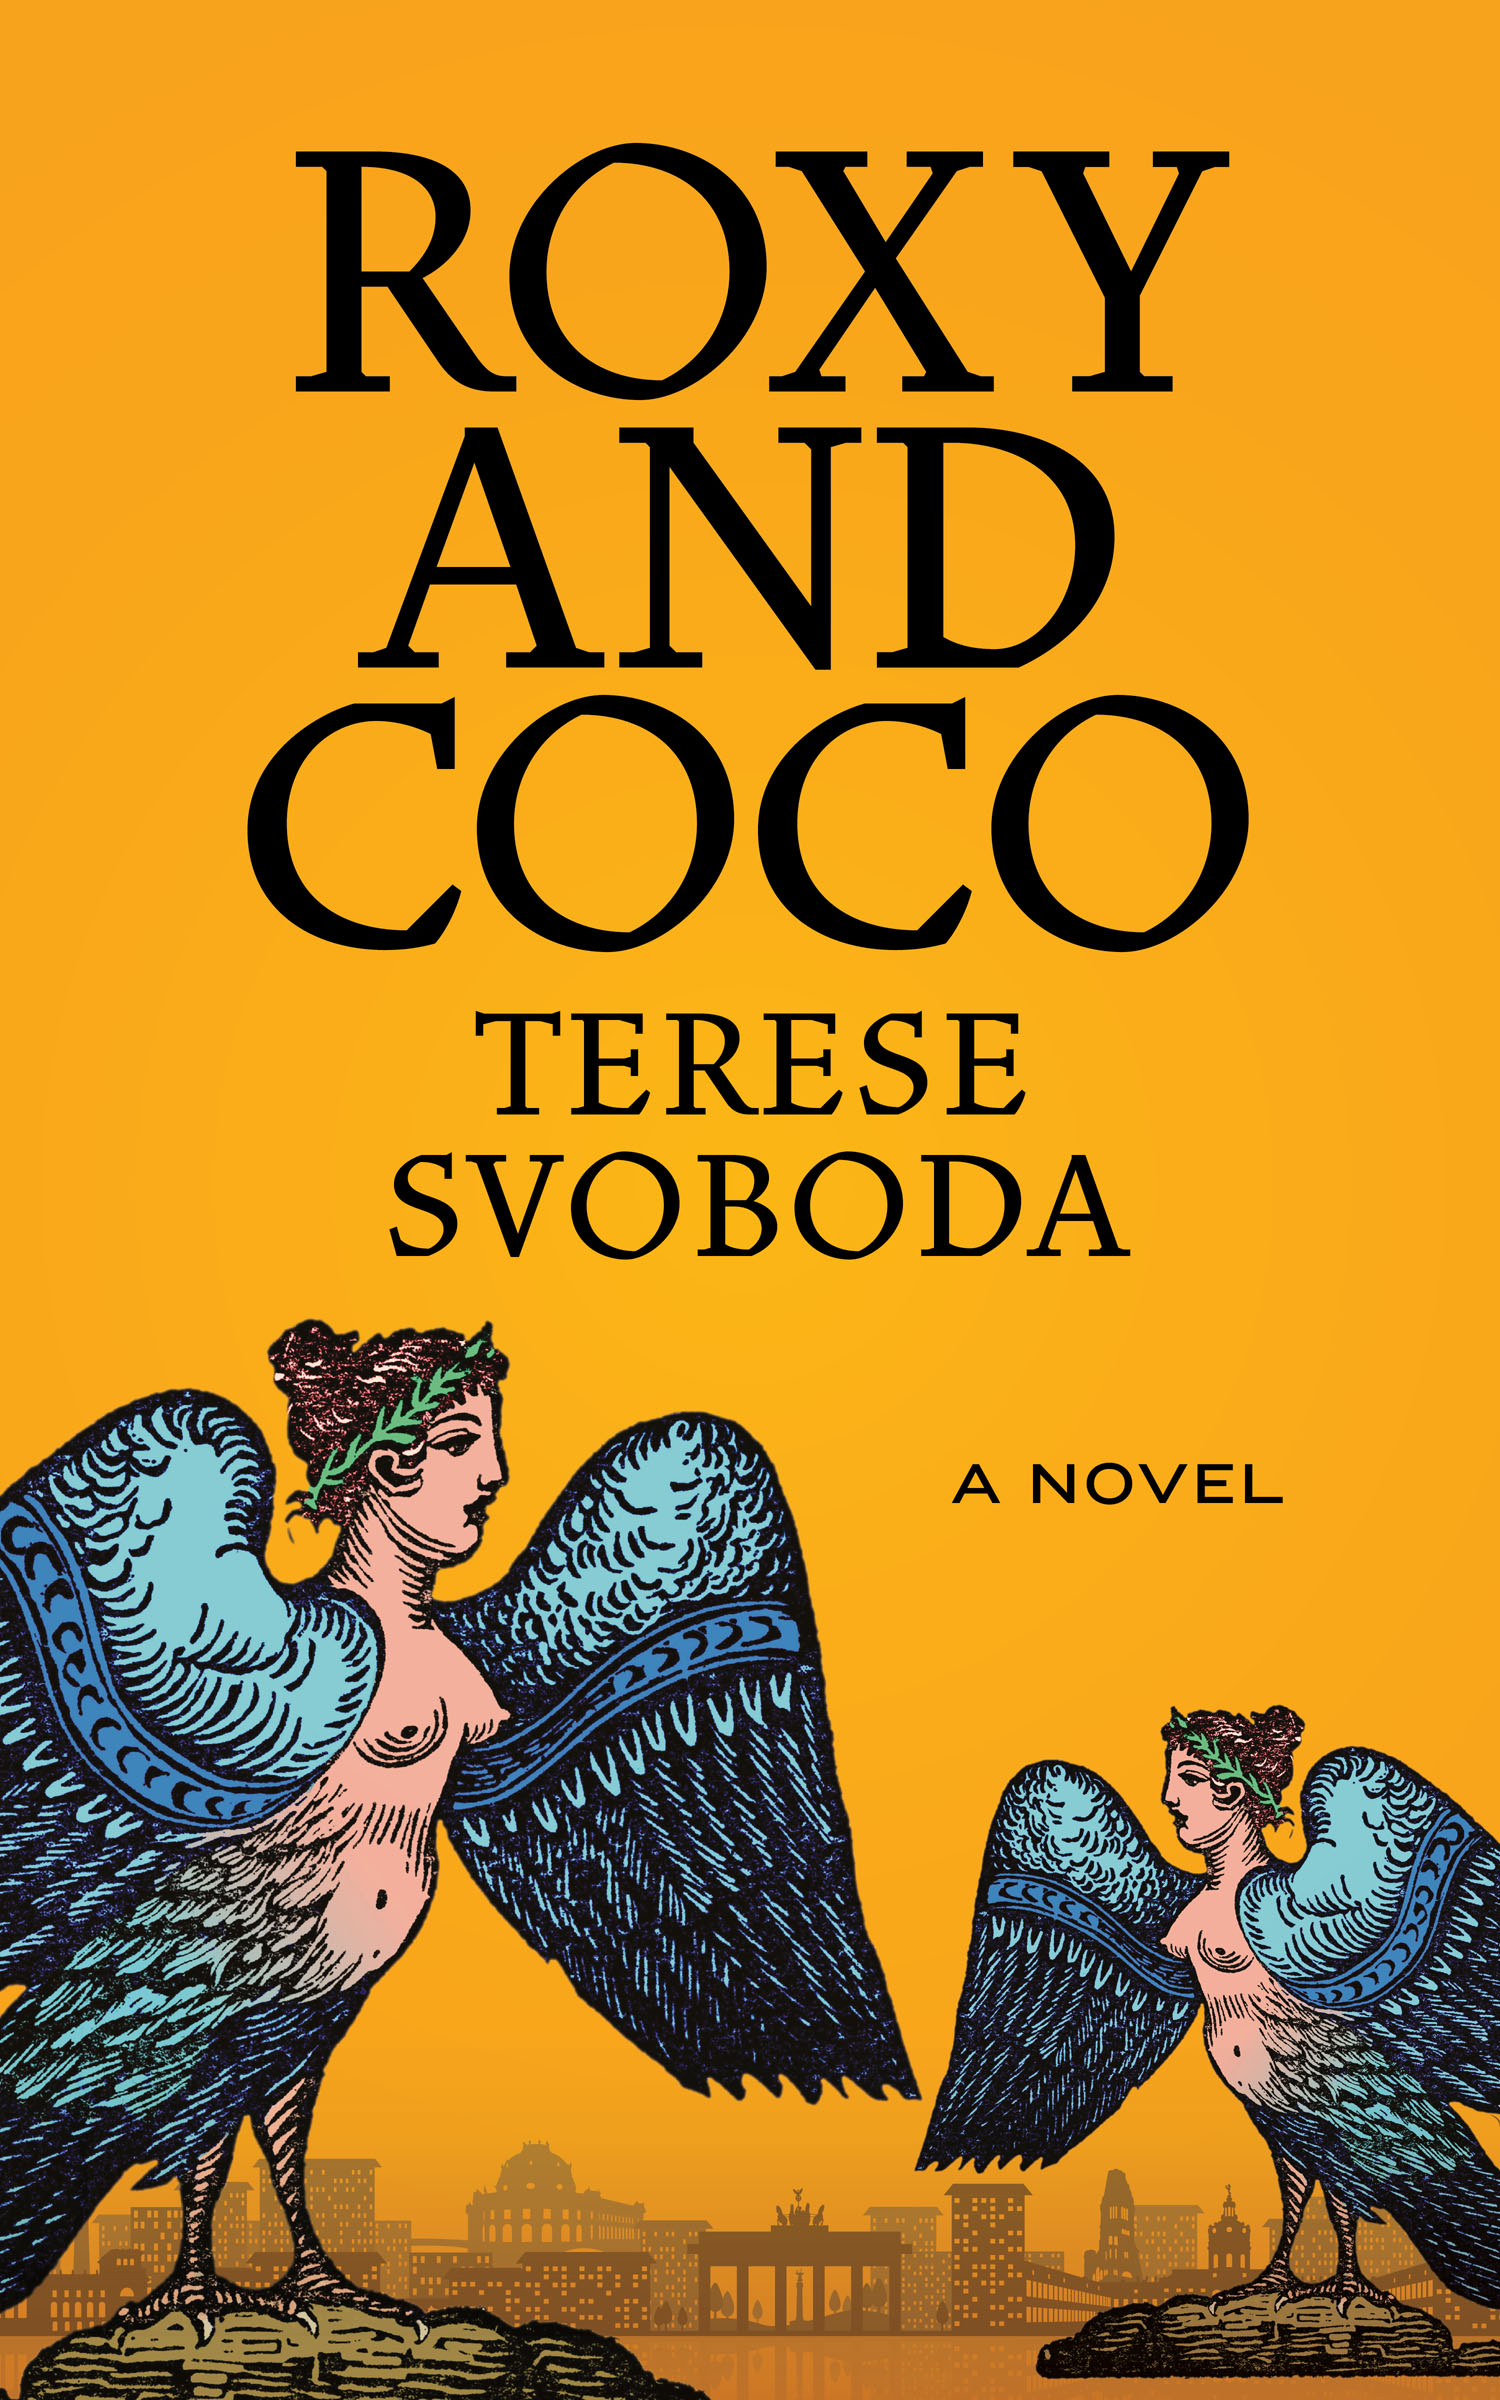 two illustrated harpies with blue wings set against an orange background with a city skyline in the distant background; text reads Roxy and Coco: A Novel, Terese Svoboda